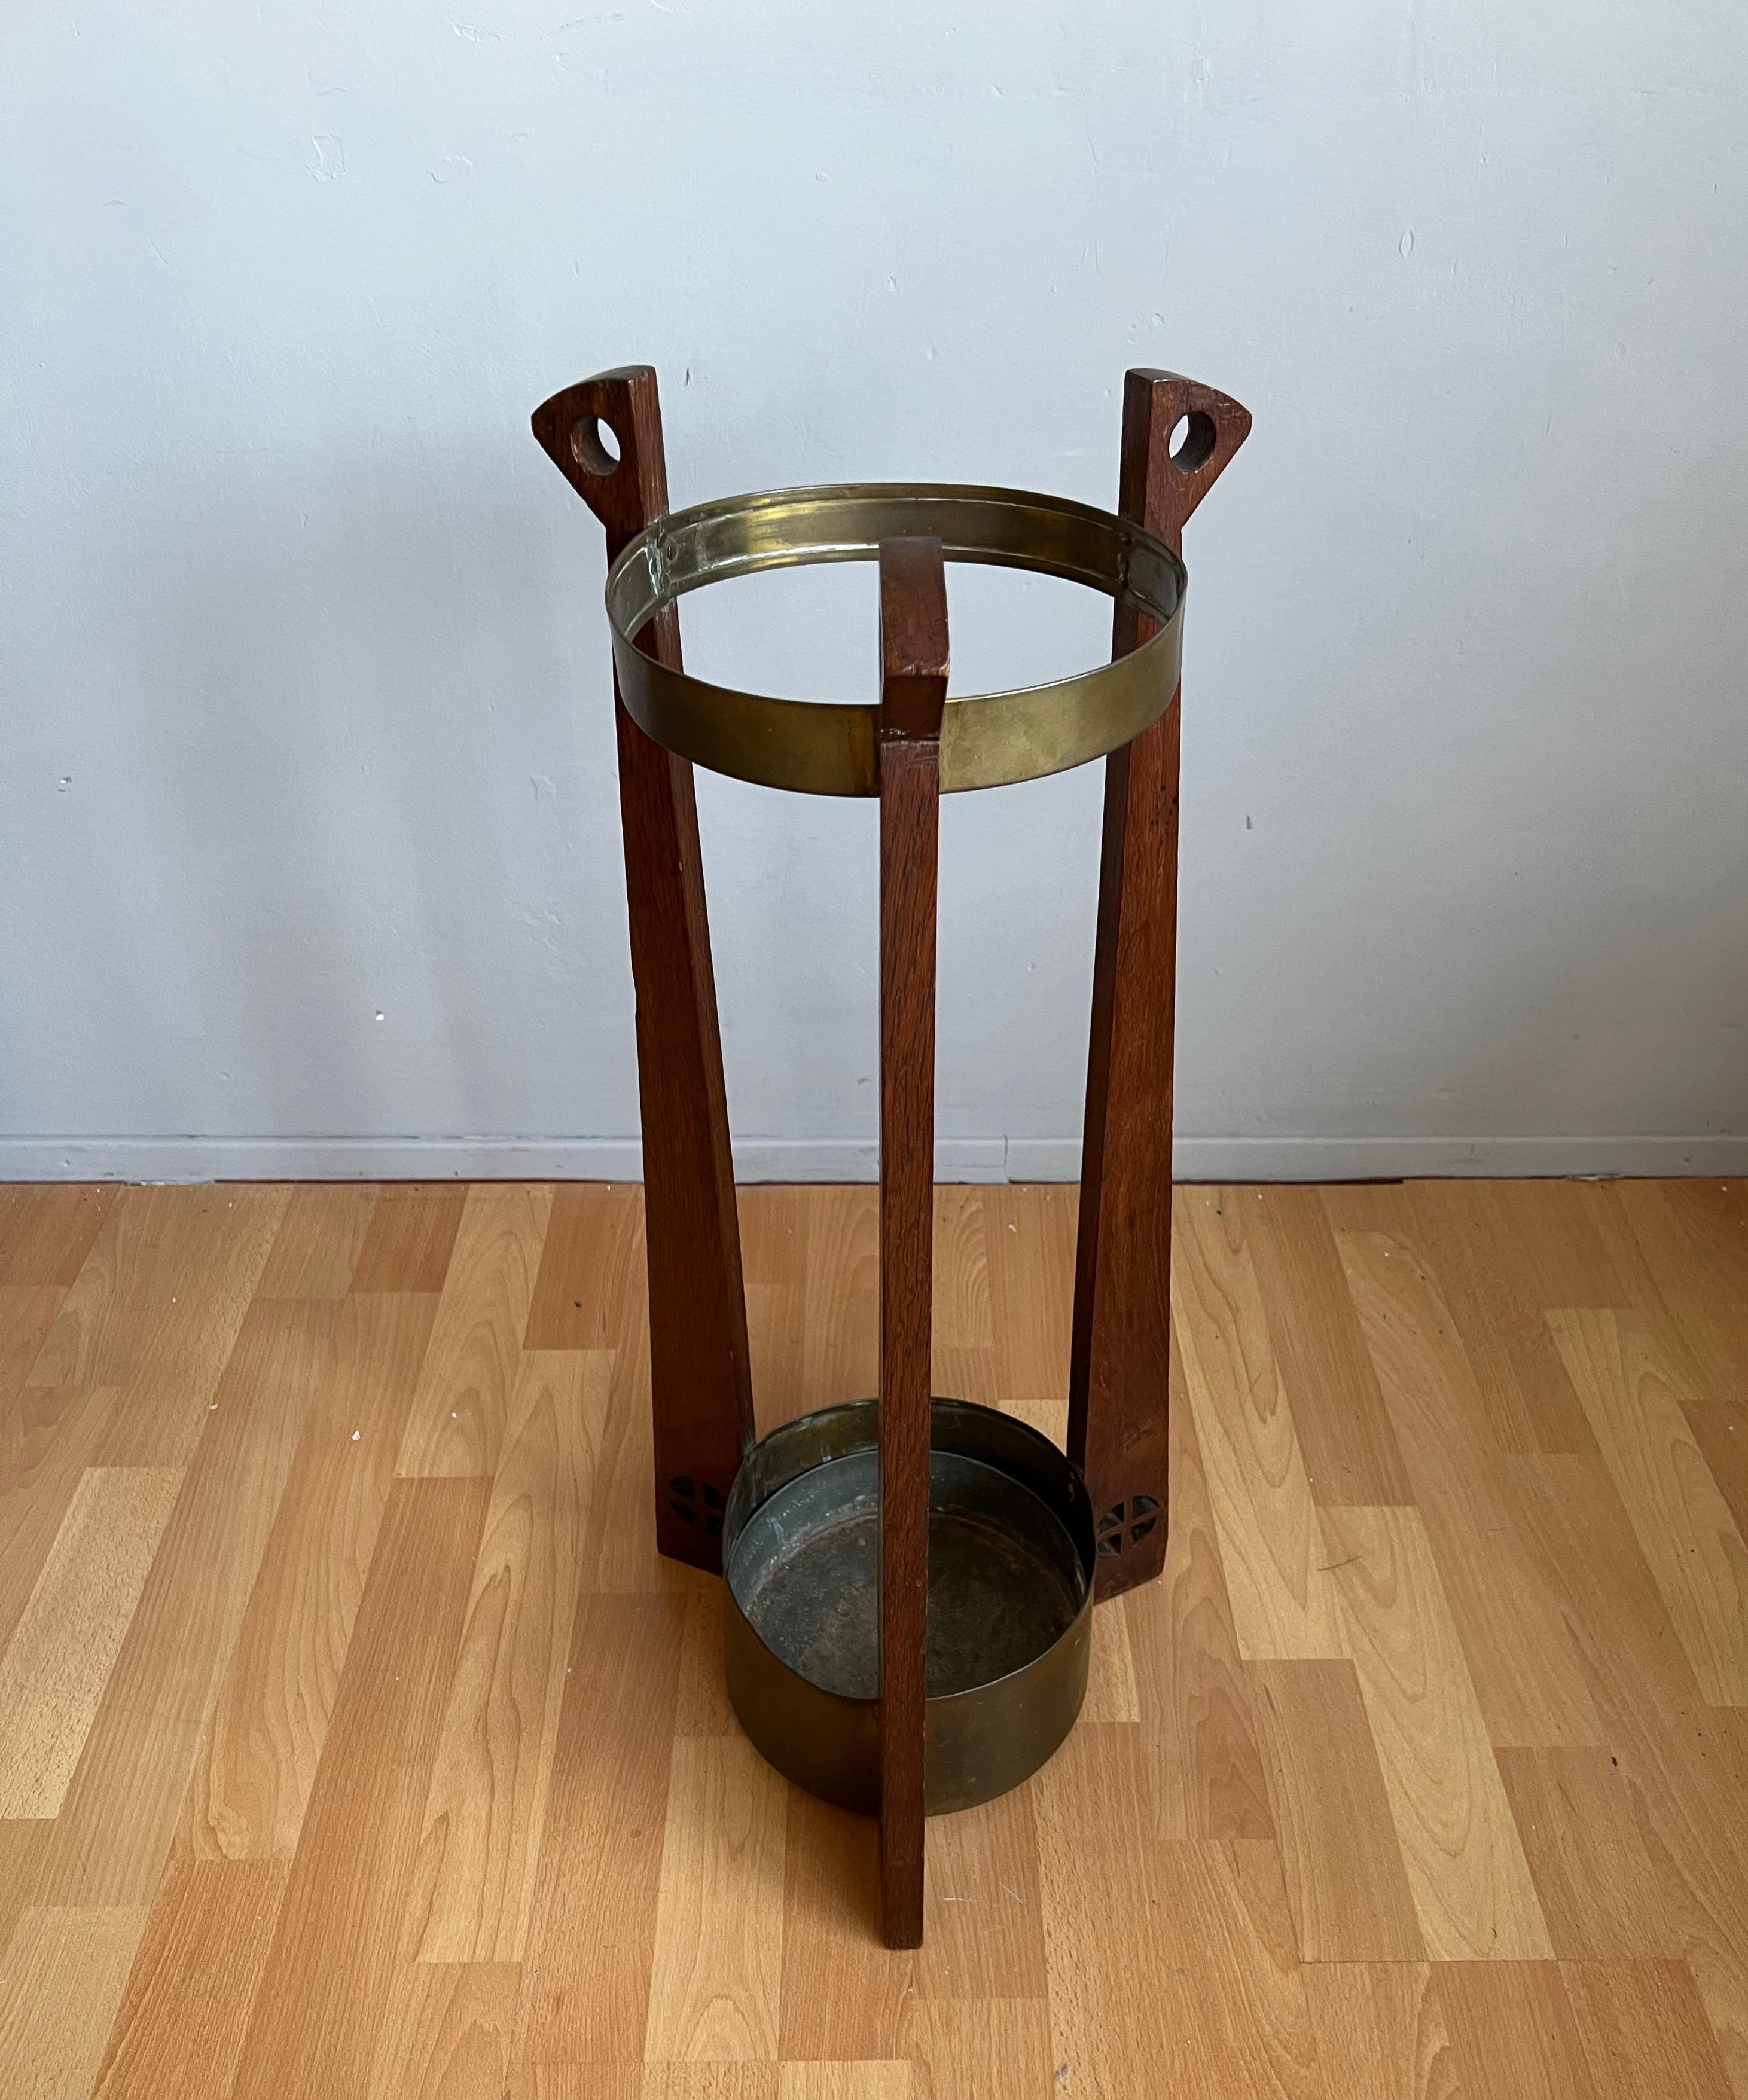 Gustave Serrurier-Bovy Brass and Oak Cane & Umbrella Stand with Zinc Liner For Sale 5